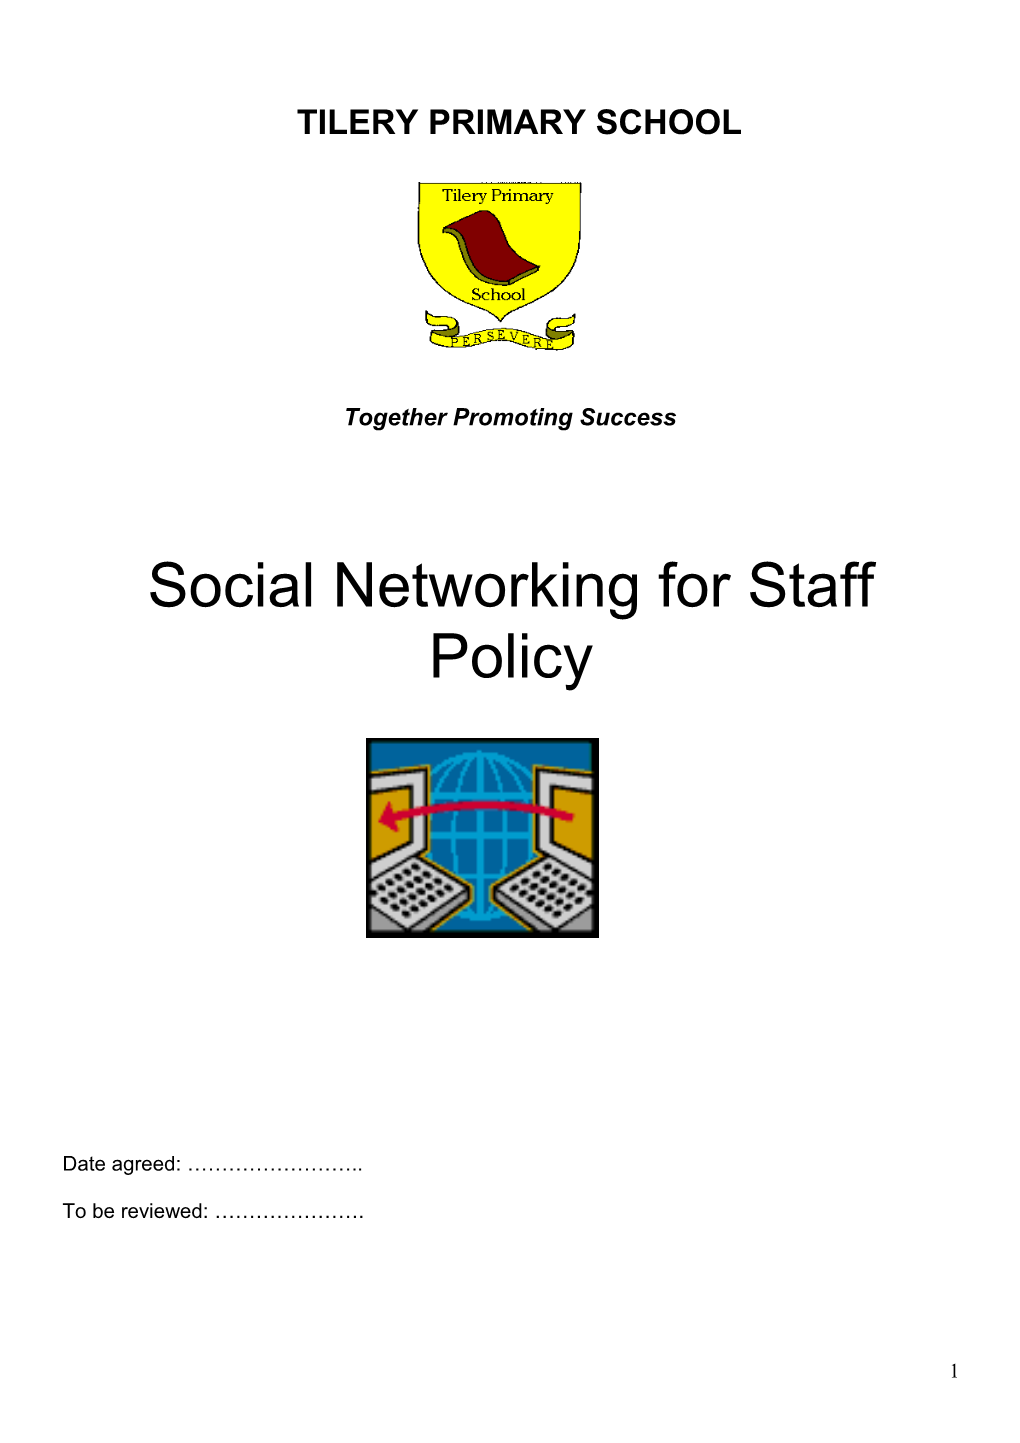 Social Networking Policy for Staff in Schools